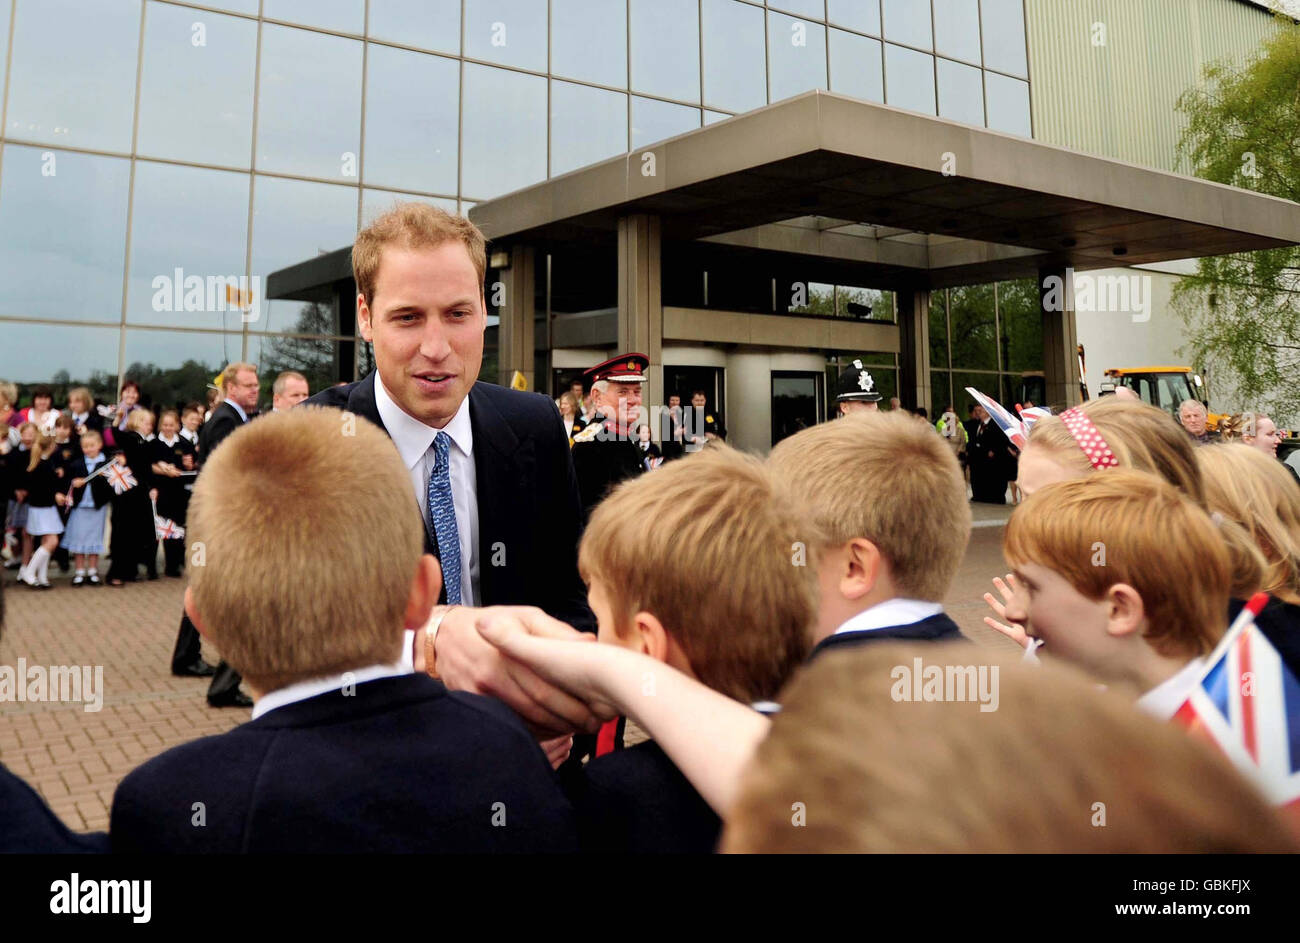 Prince William arrives for a visit to the World Headquarters of JCB, one of the world's largest manufacturers of construction equipment, to mark the production of the company's 750,000th machine in Rocester, Staffordshire. Stock Photo